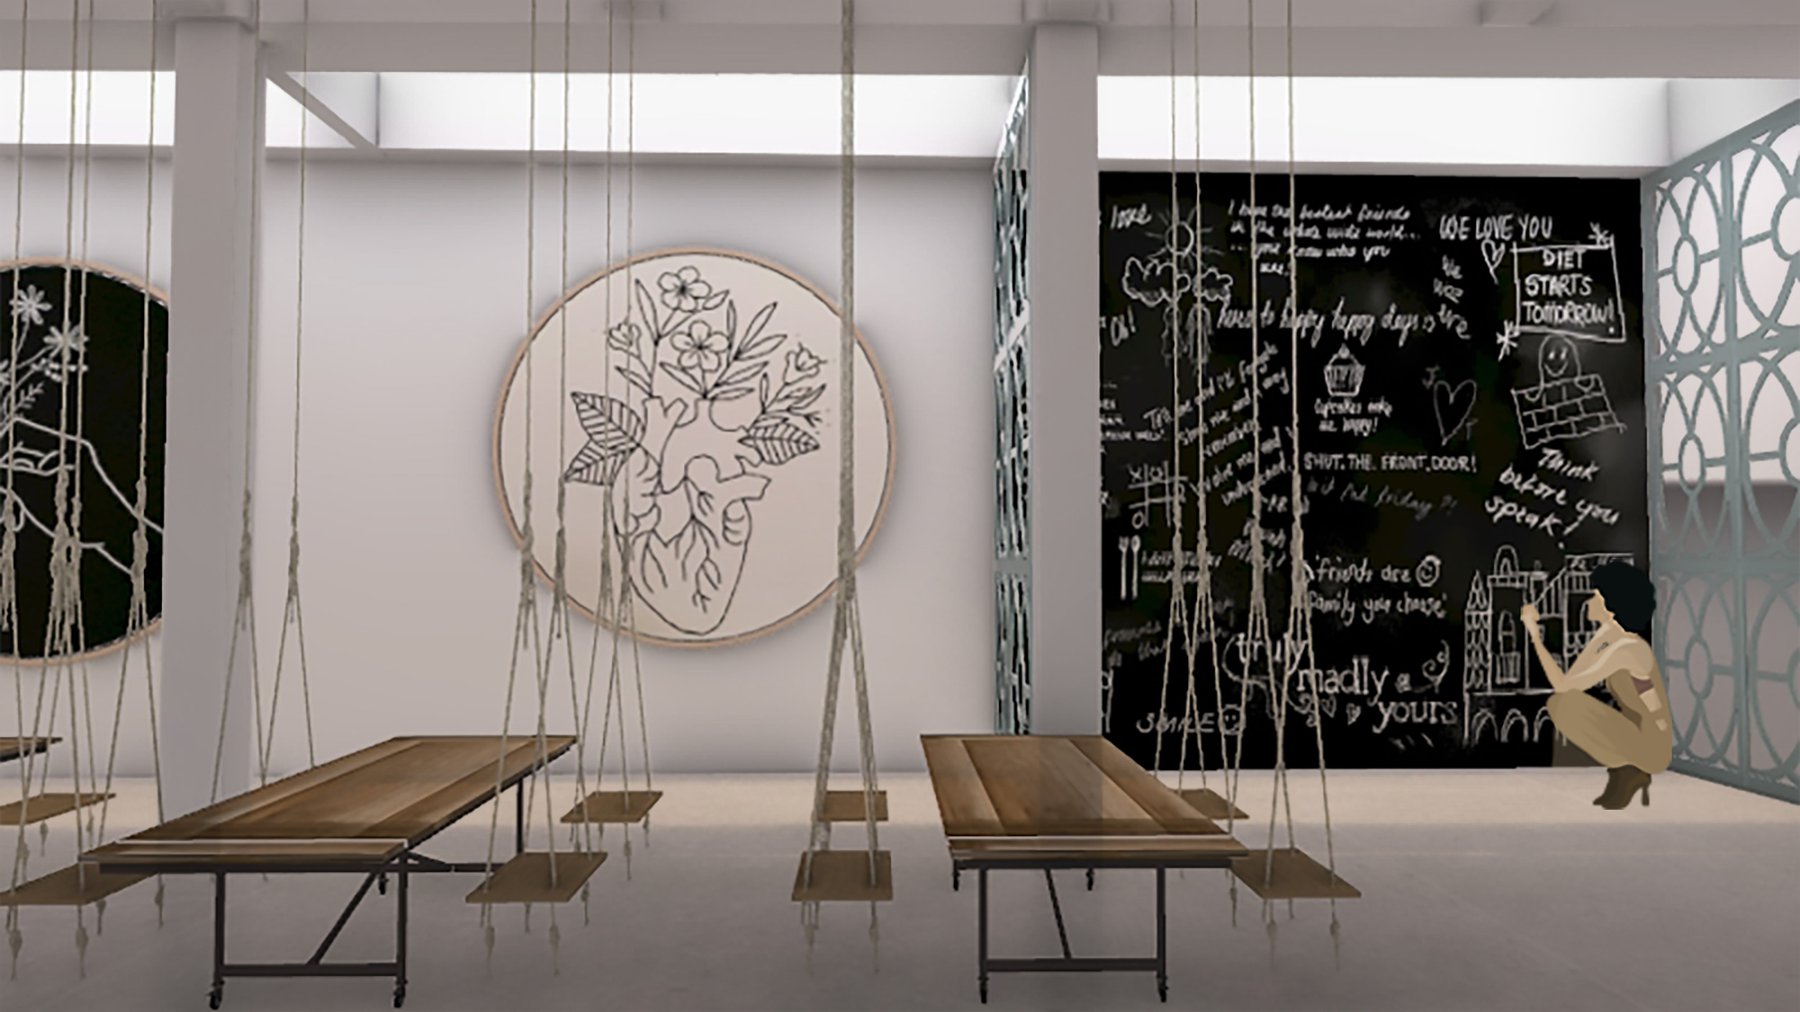 Concept proposal showing tables, swings and chalk board